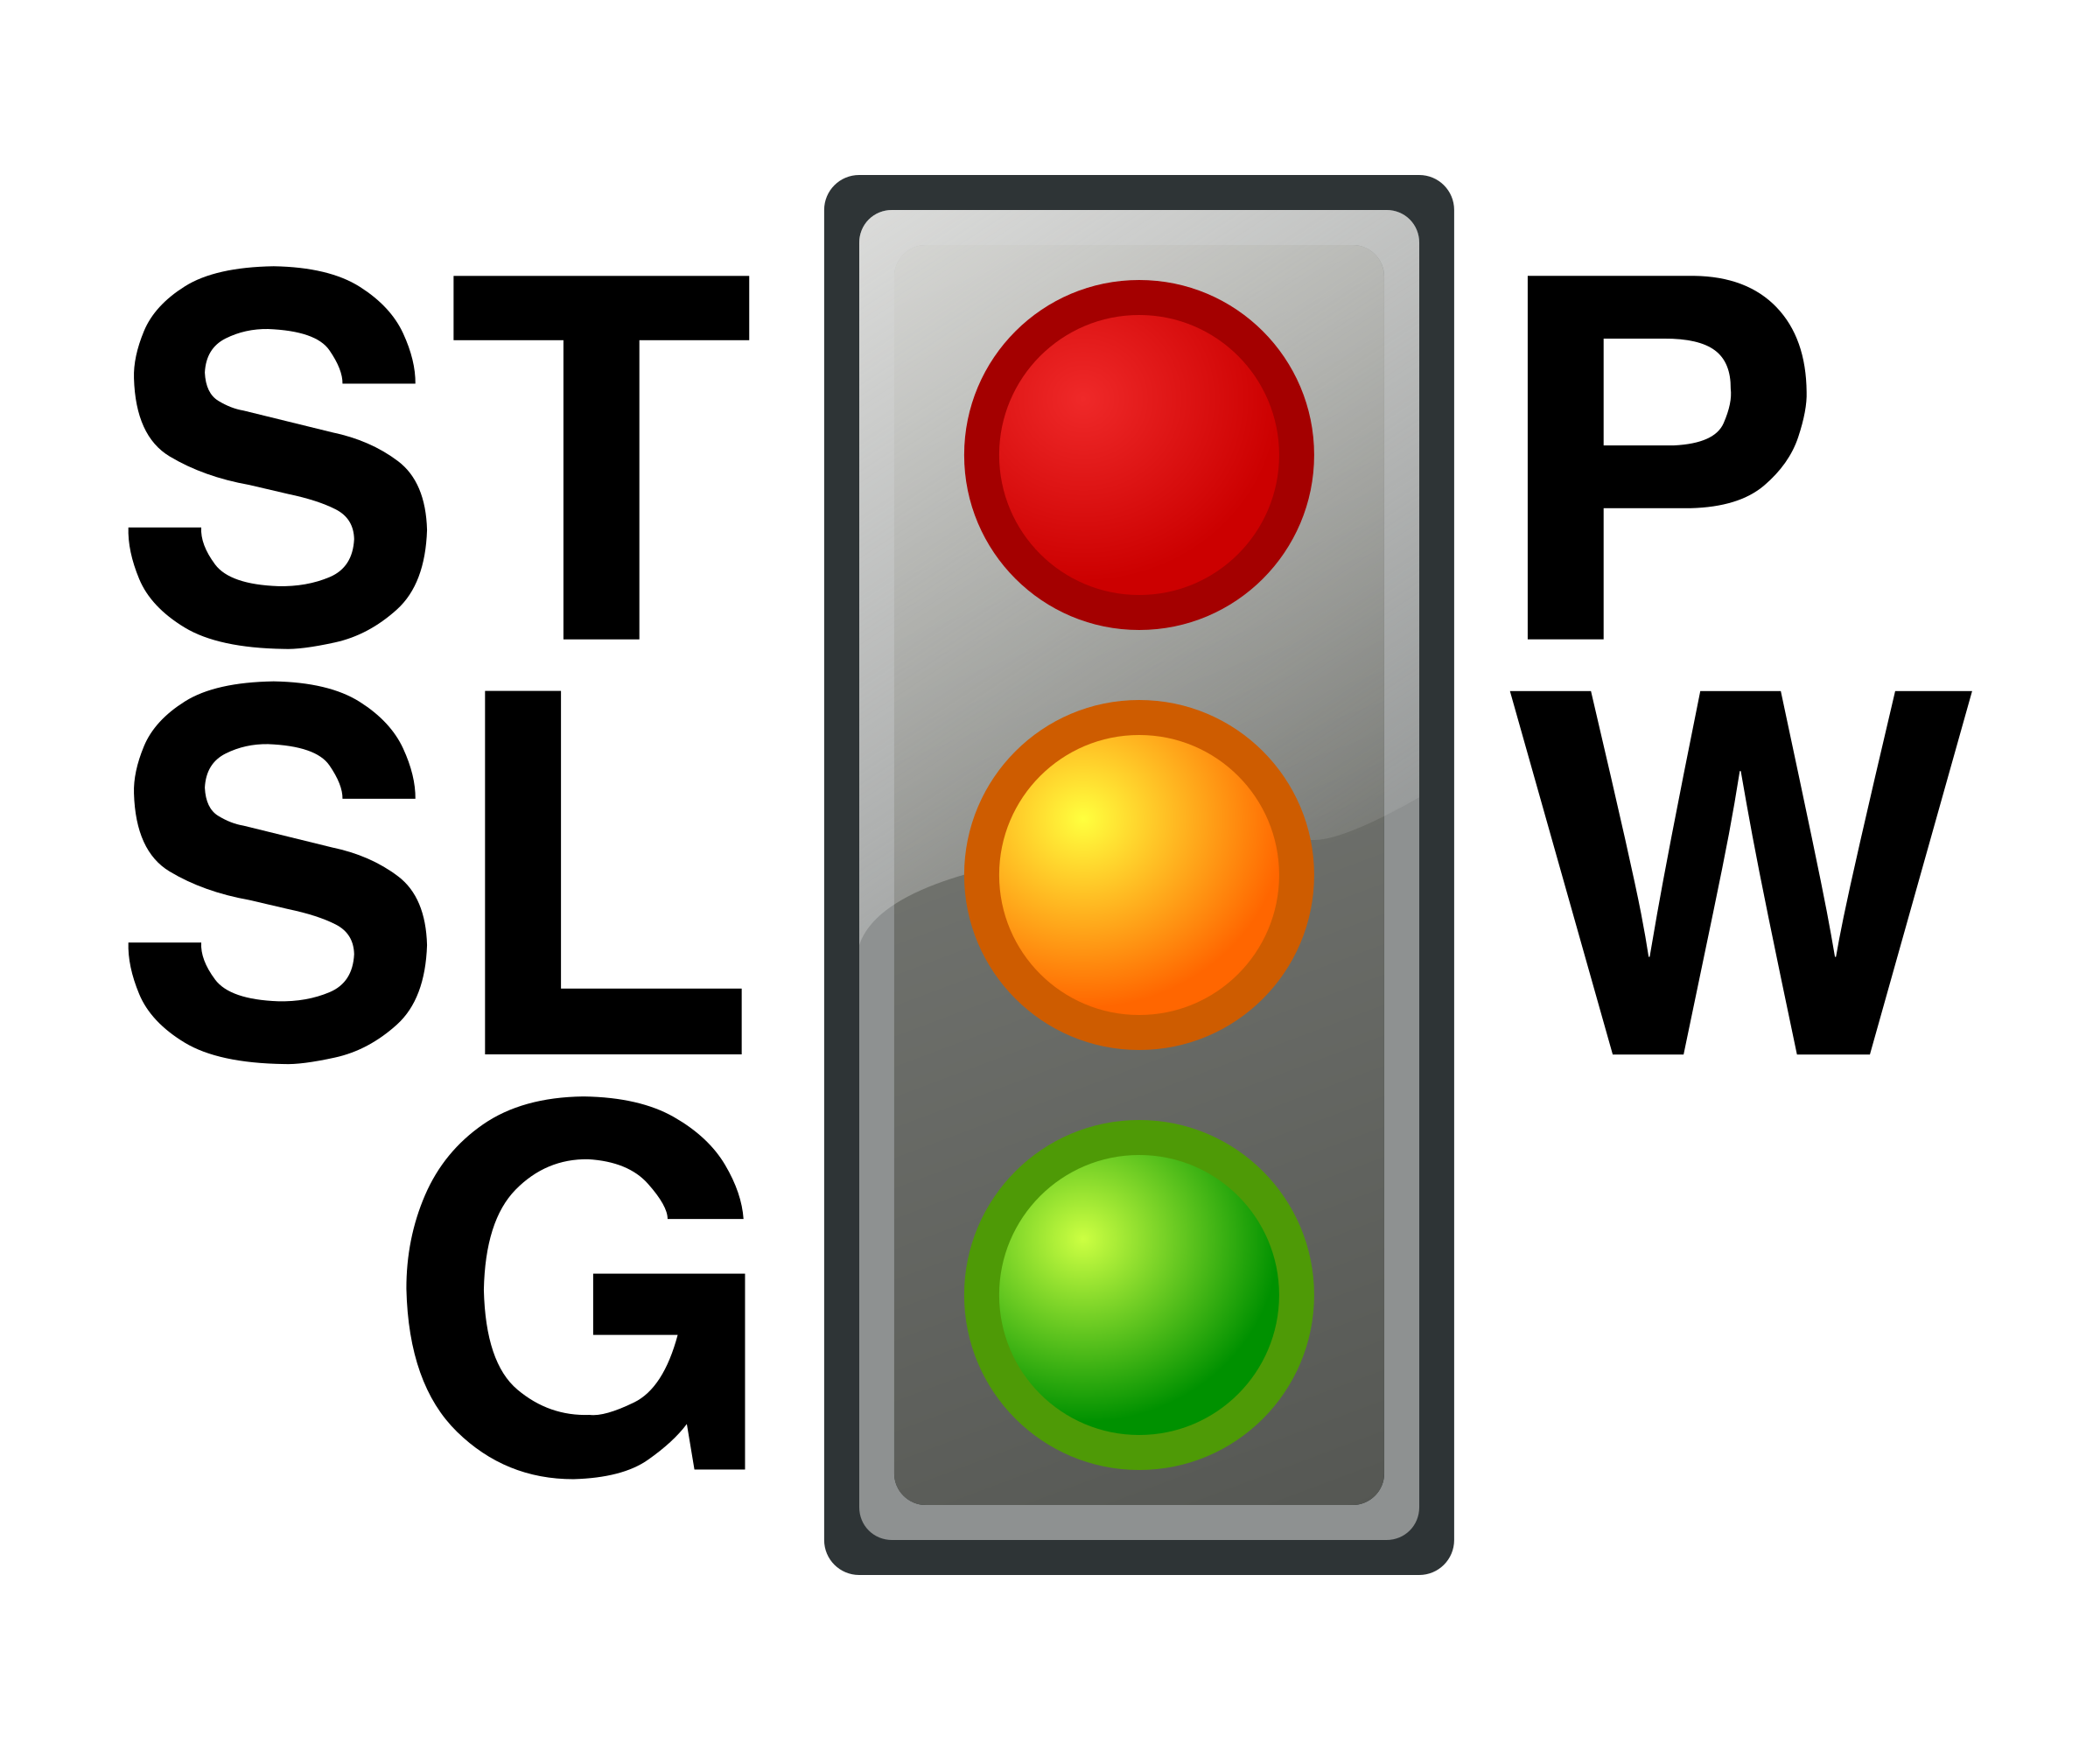 Clipart - Meaning of the traffic lights